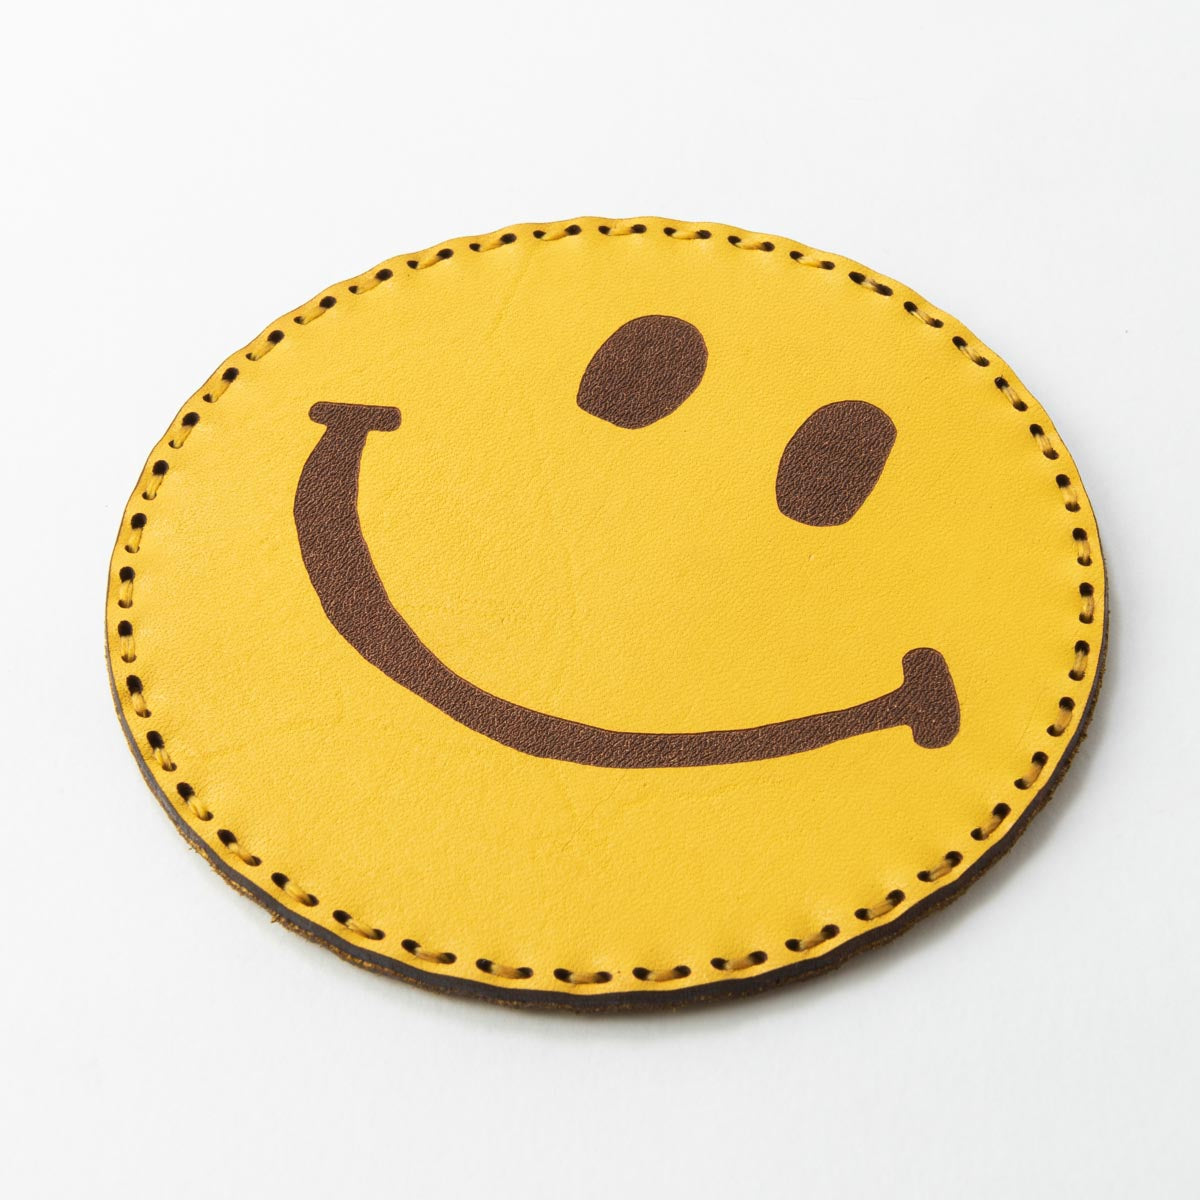 Fire-King レザーコースター SMILEY FACE イエロー by OJAGA DESIGN